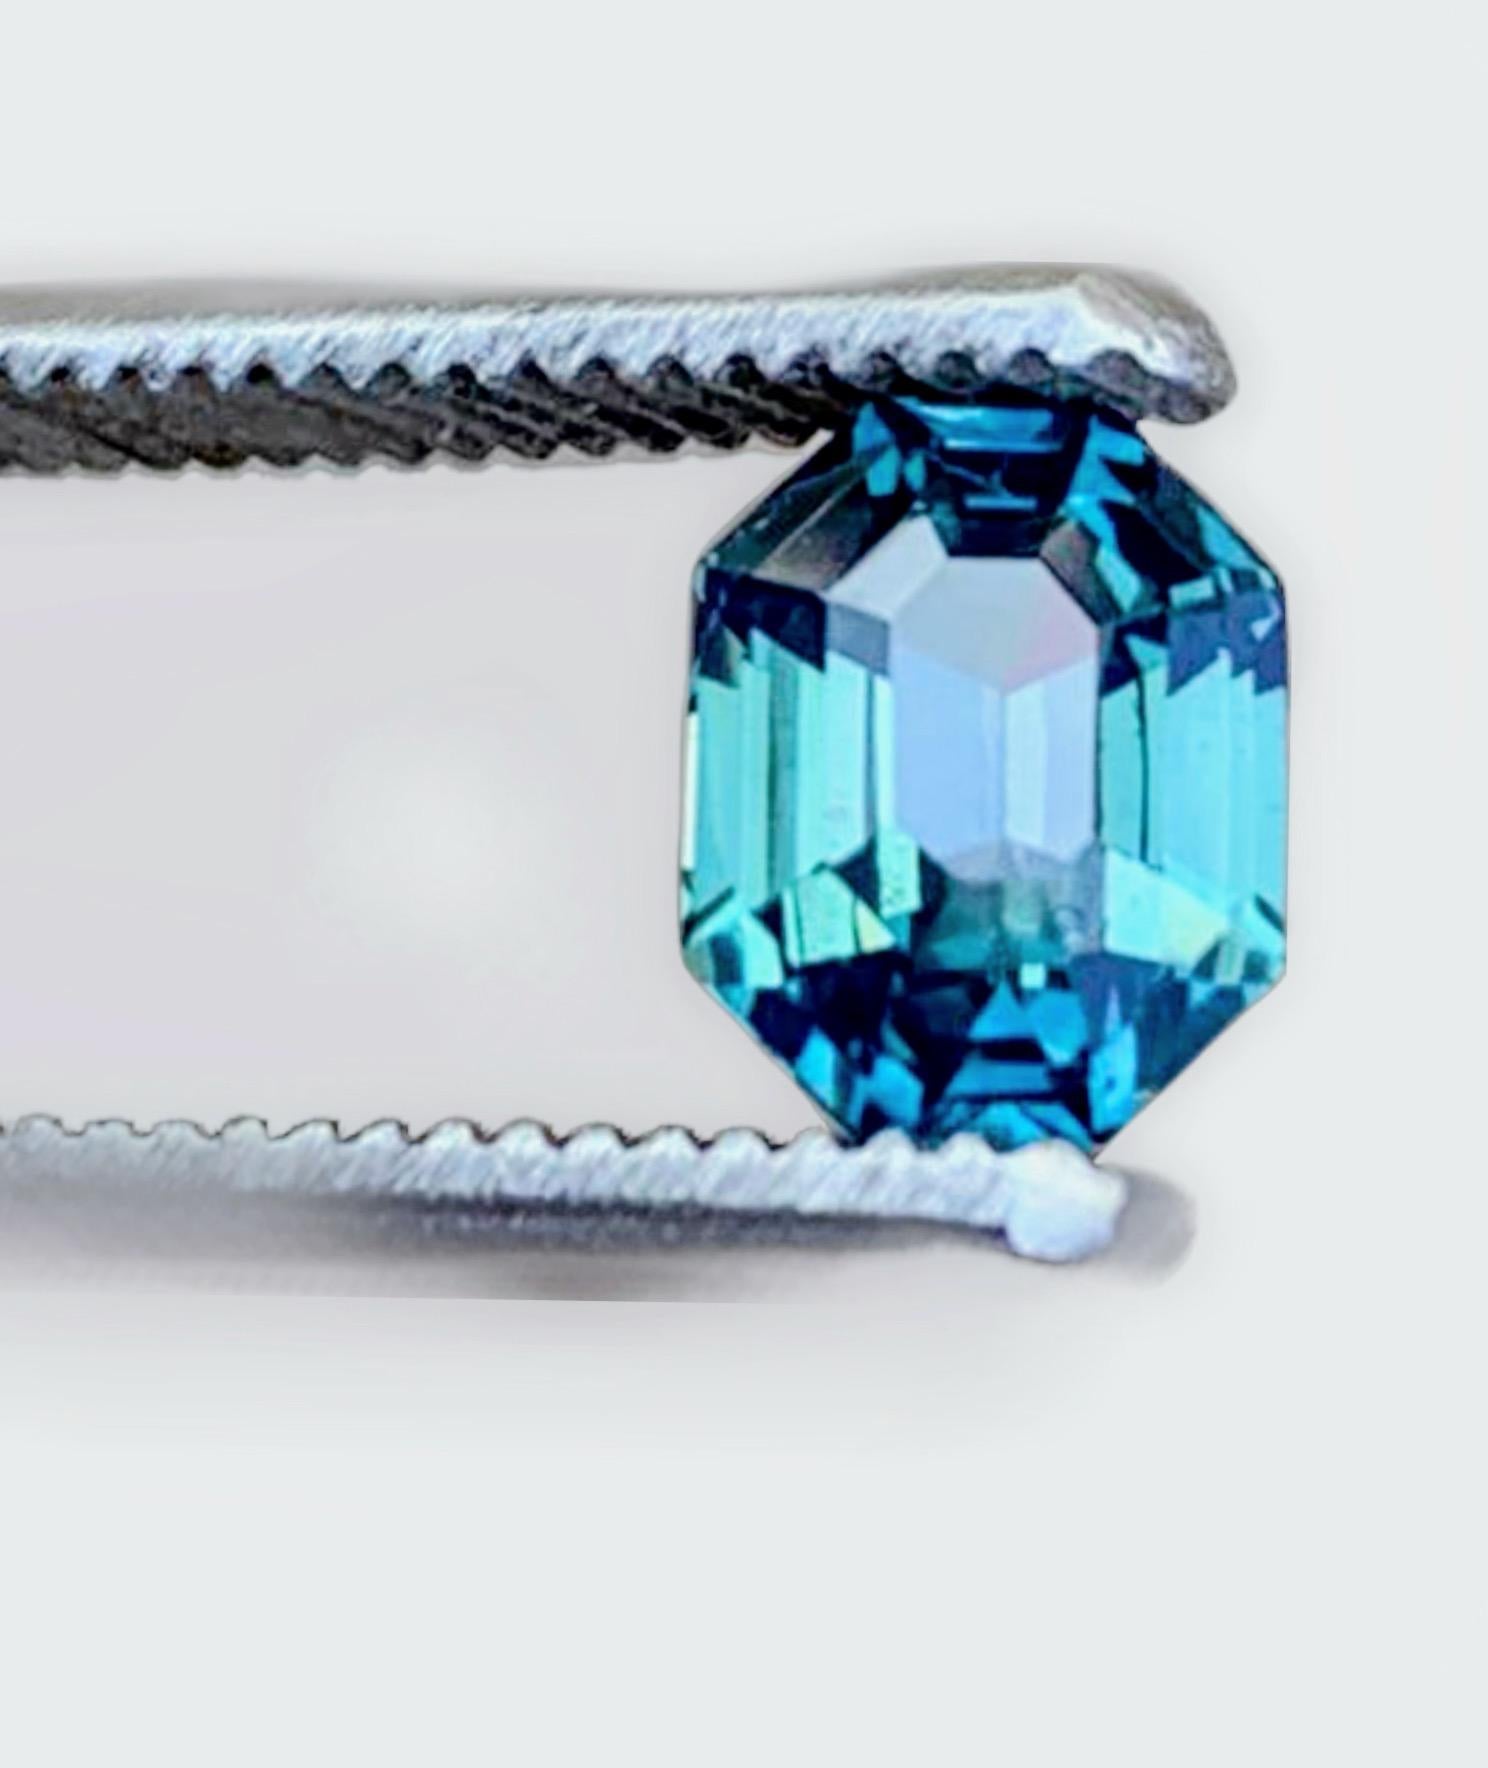 Artisan 2.5ct Radiant Cut Loup Clean Natural Unheated Teal Blue Sapphire Gemstone   For Sale